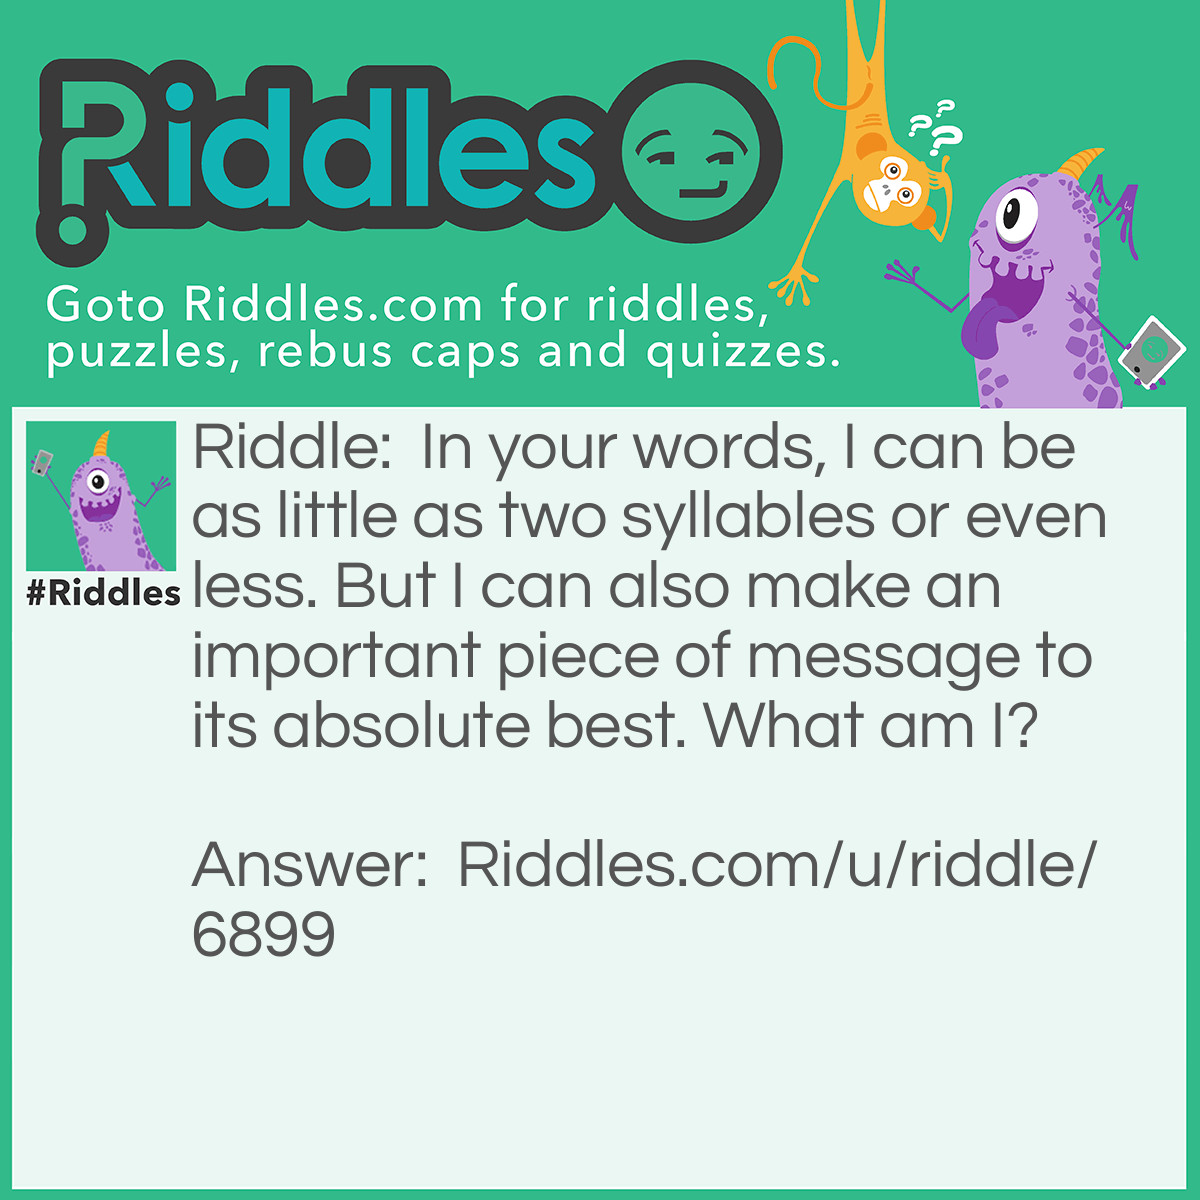 Riddle: In your words, I can be as little as two syllables or even less. But I can also make an important piece of message to its absolute best. What am I? Answer: A letter.